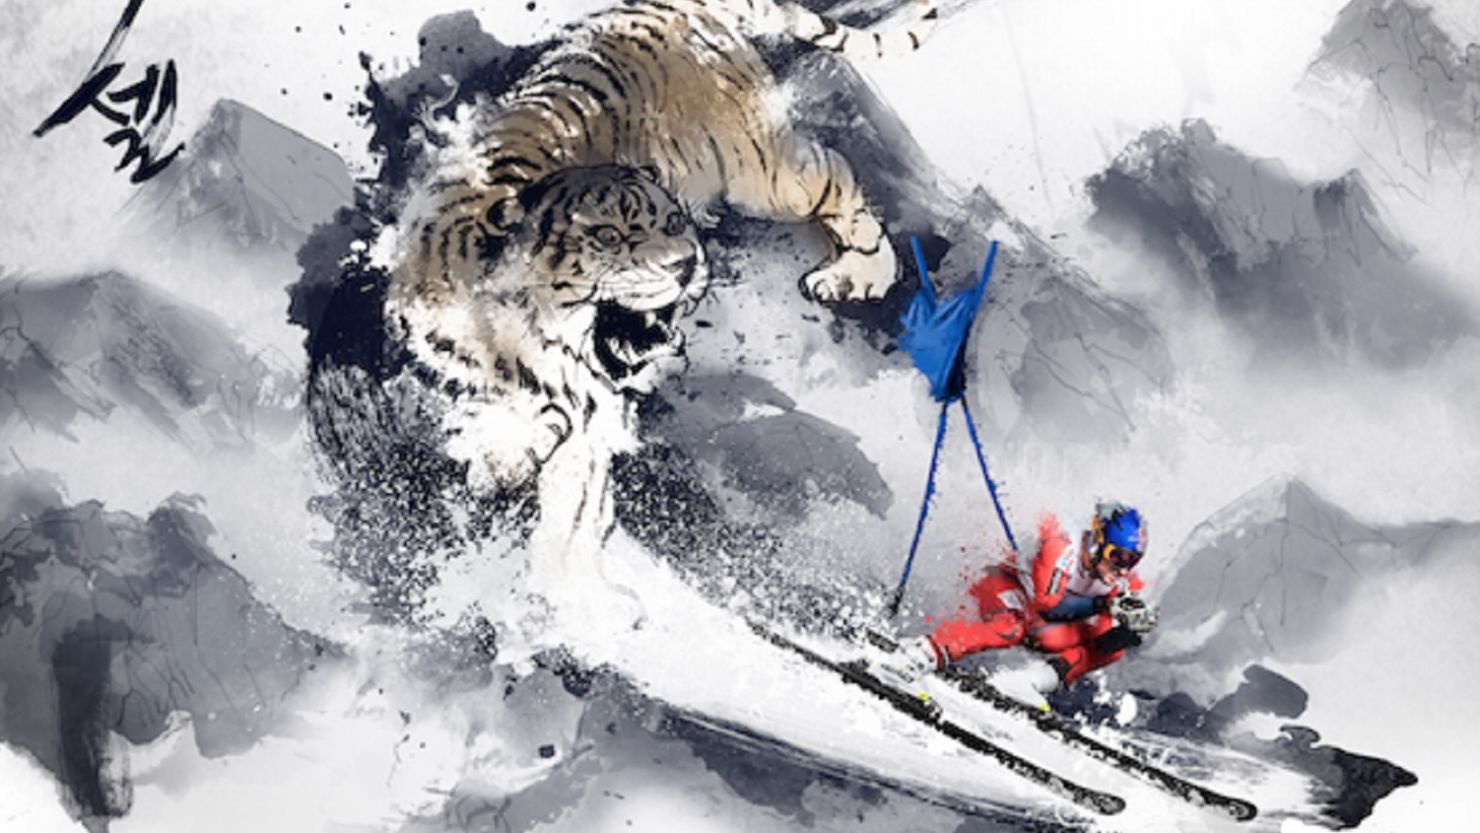 Aksel Lund Svindal chased down the slope by a Korean white tiger.